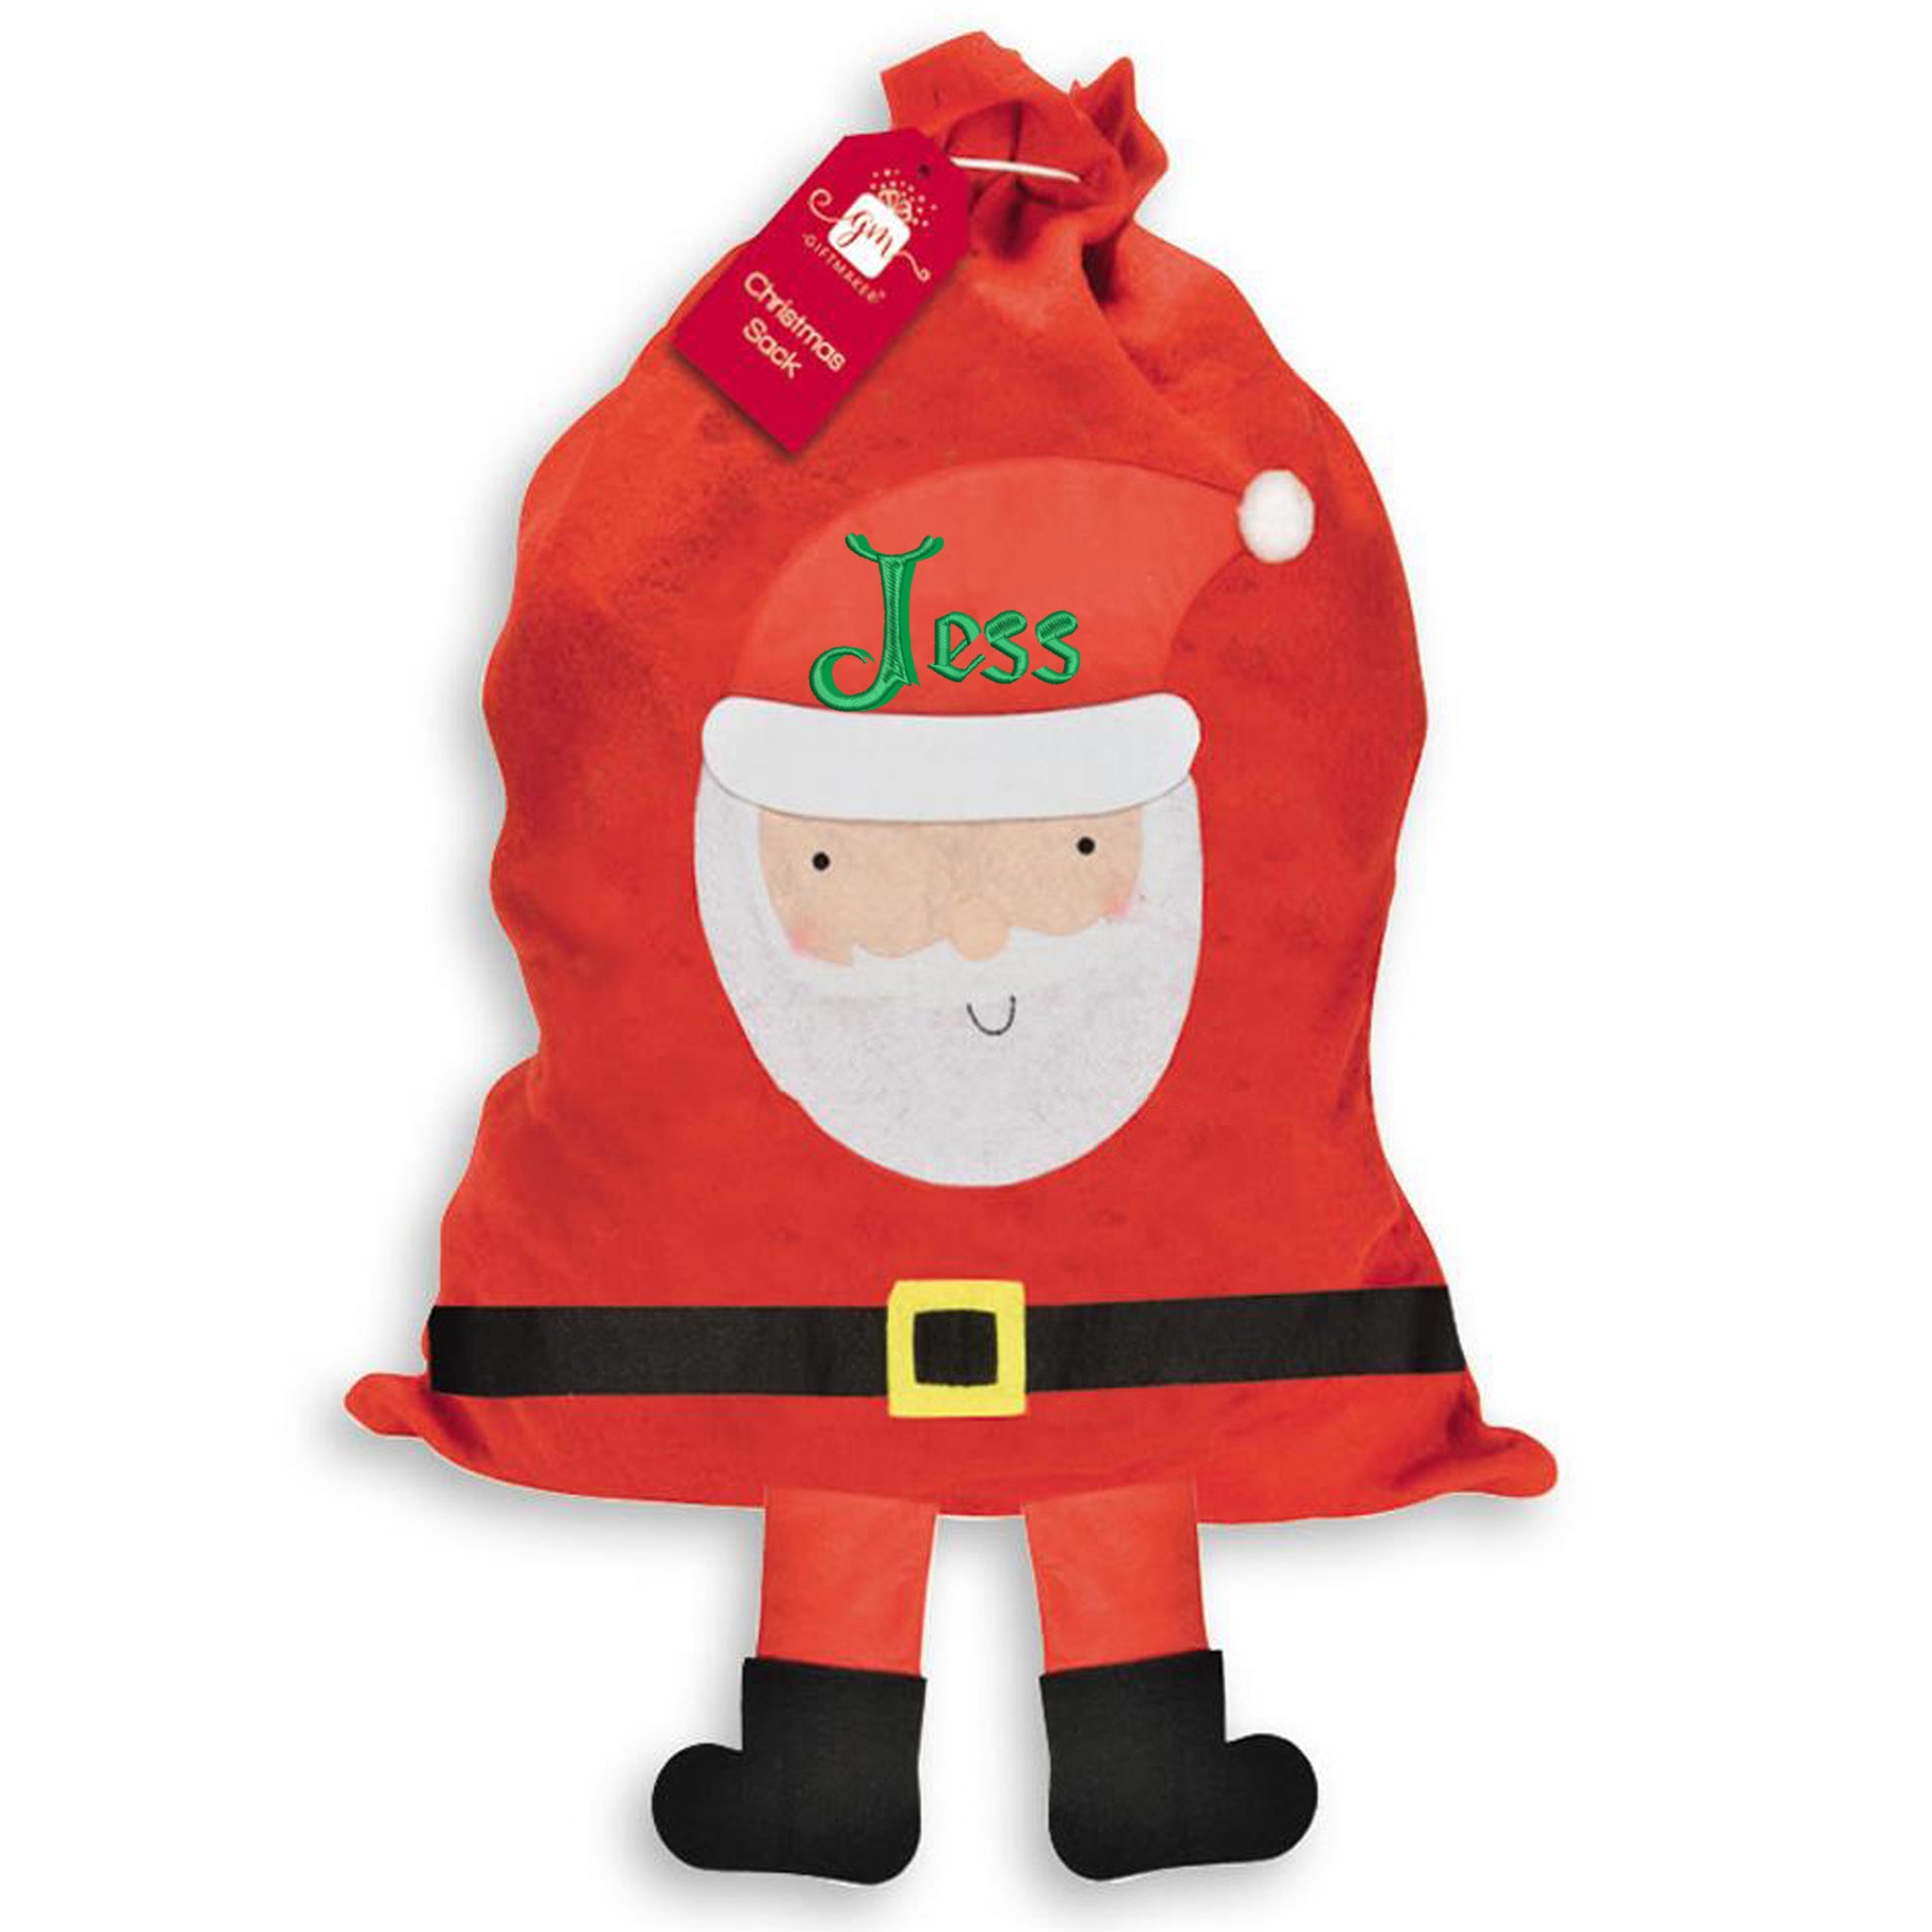 Personalised Embroidered Santa Christmas Stocking and Present Sack Set  - Always Looking Good -   